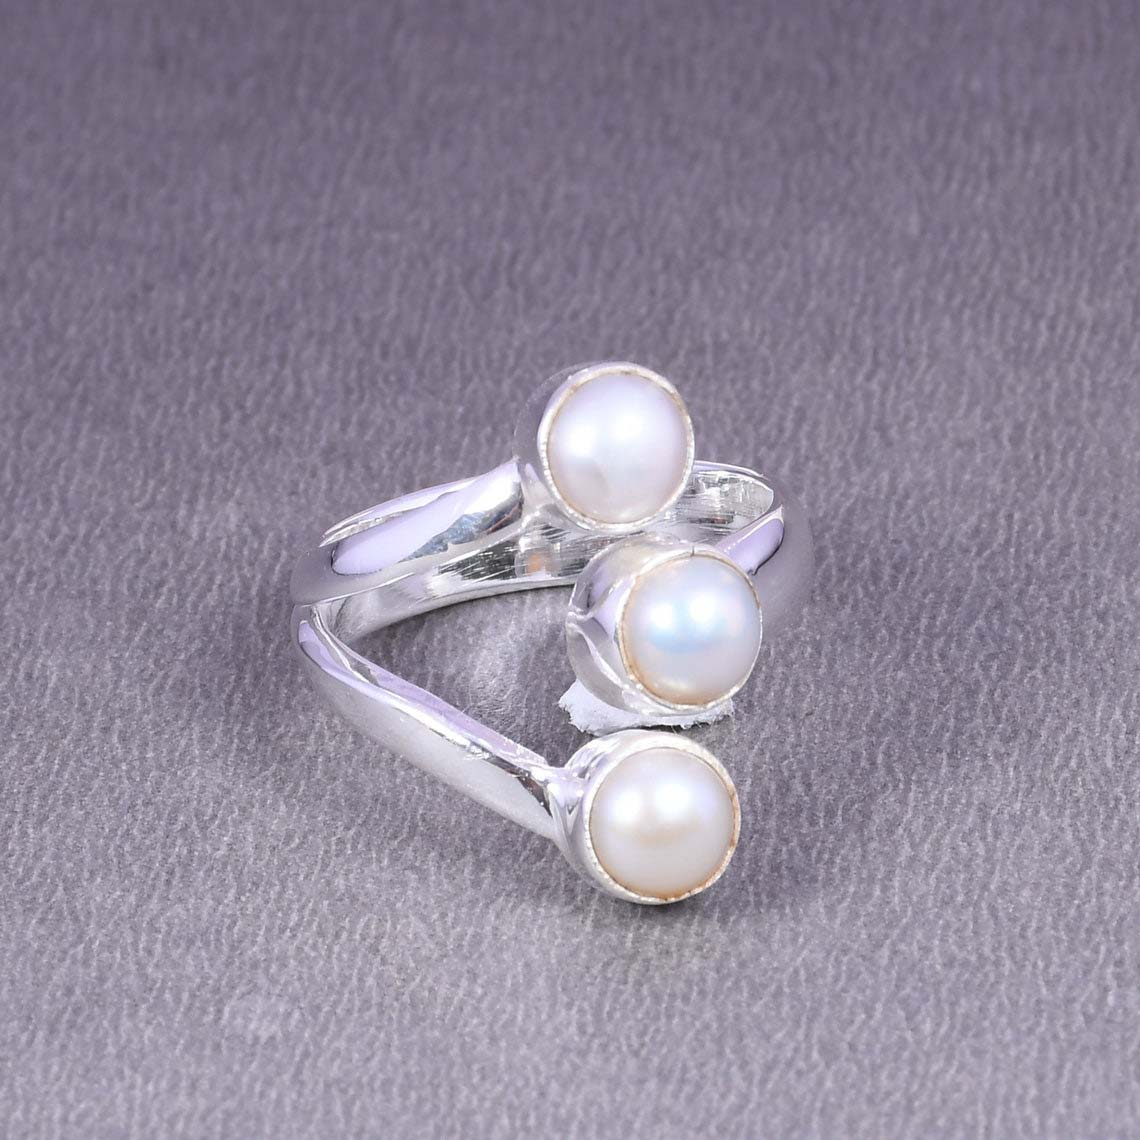 Black & White Pearl Ring 001-341-00028 - $500 or Less | Joint Venture  Jewelry | Cary, NC